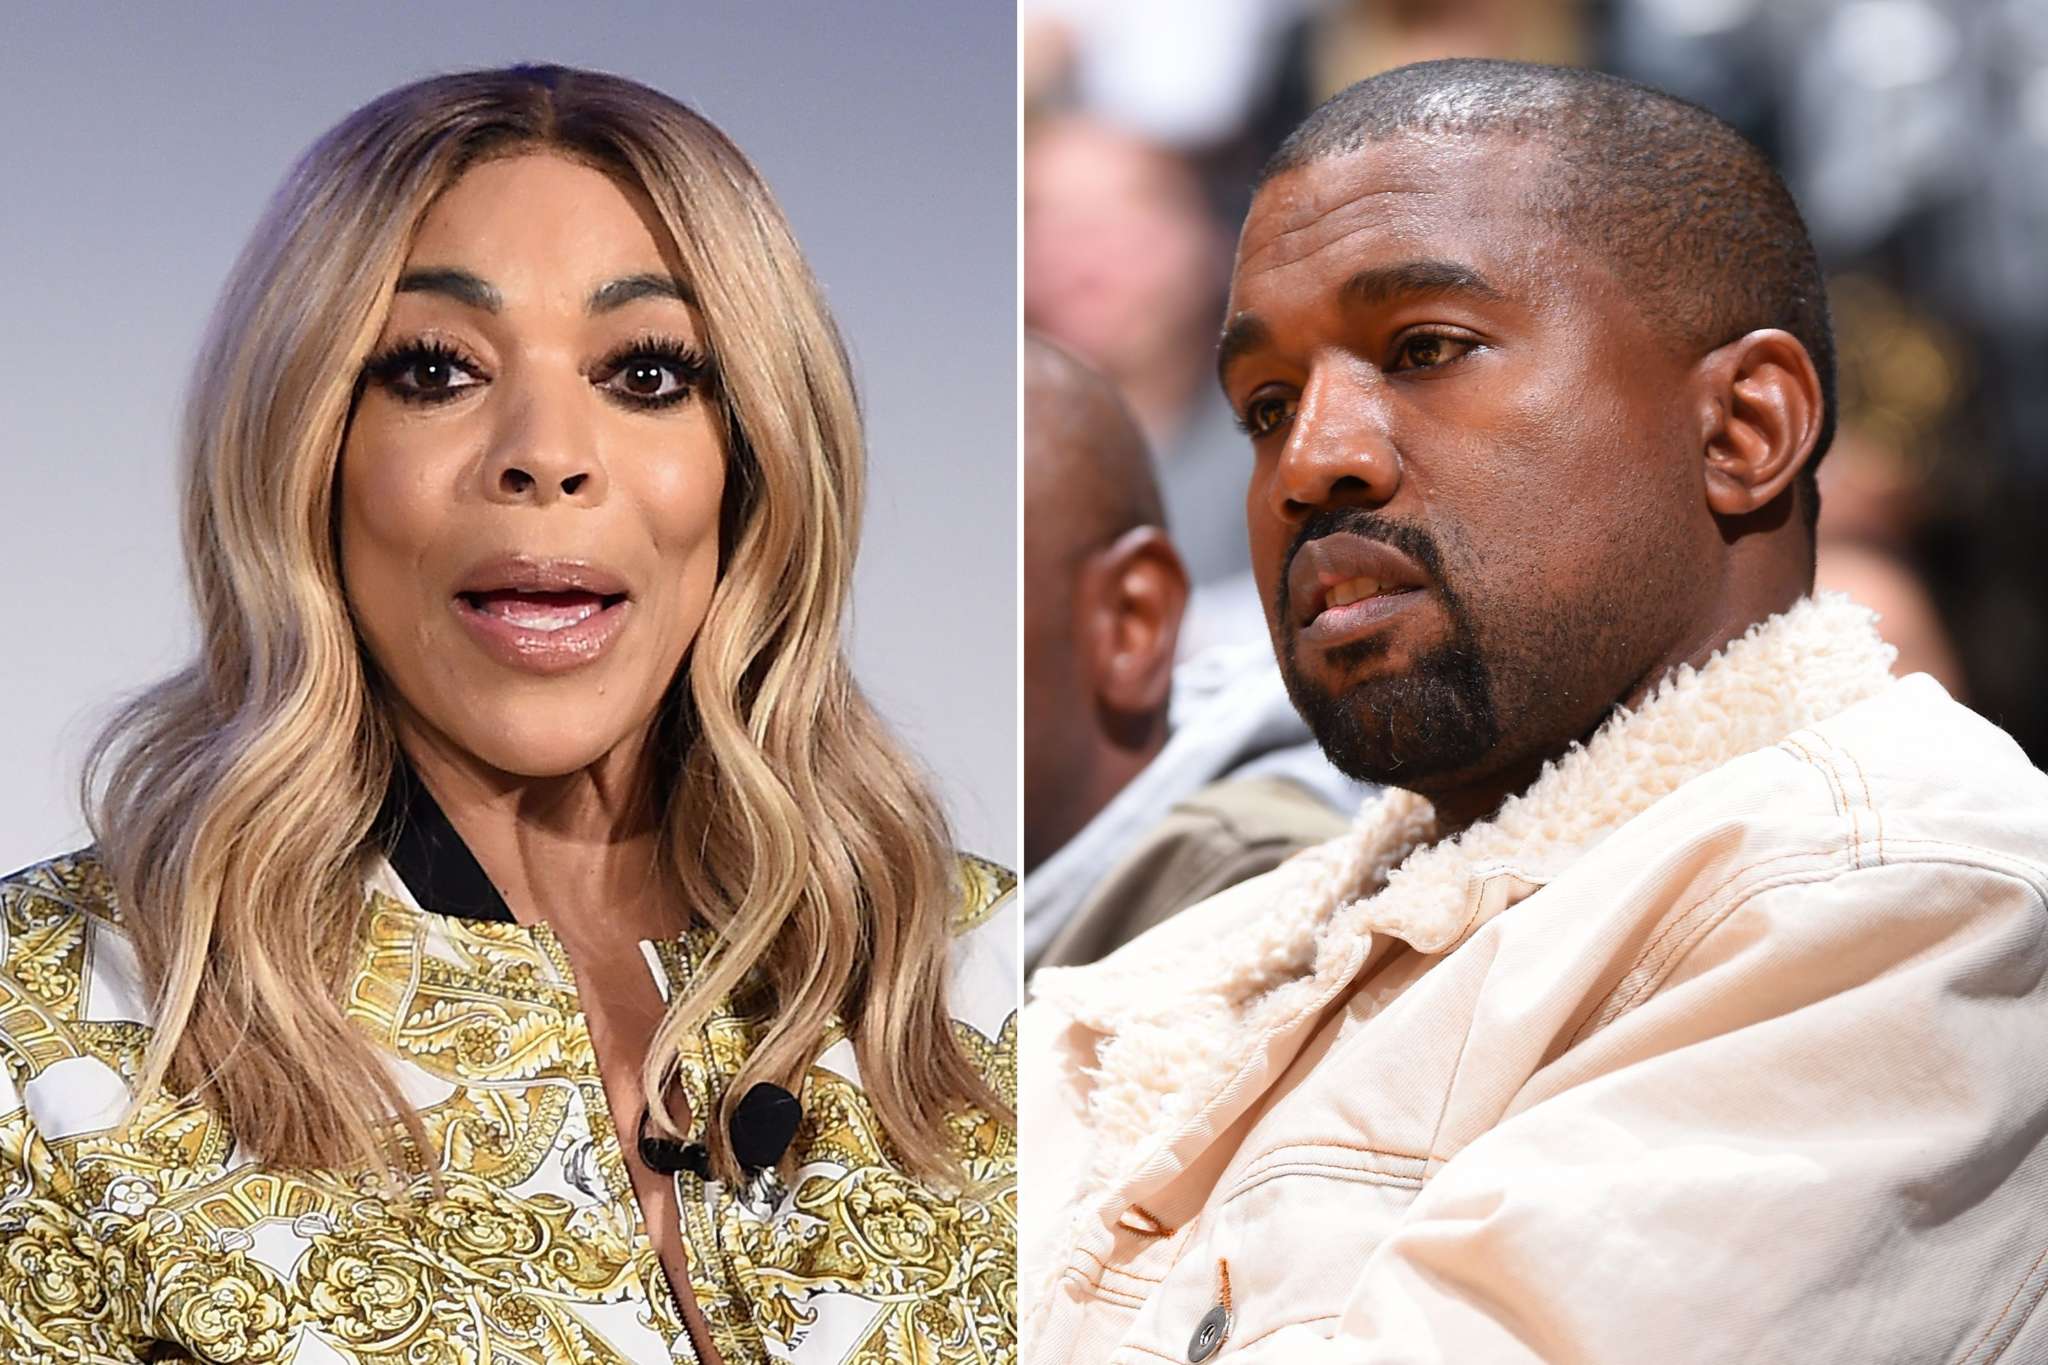 Wendy Williams' Behind The Scenes From The Kardashians' House On Kanye West's Birthday Have Fans Cracking Up And Getting Anxious At The Same Time